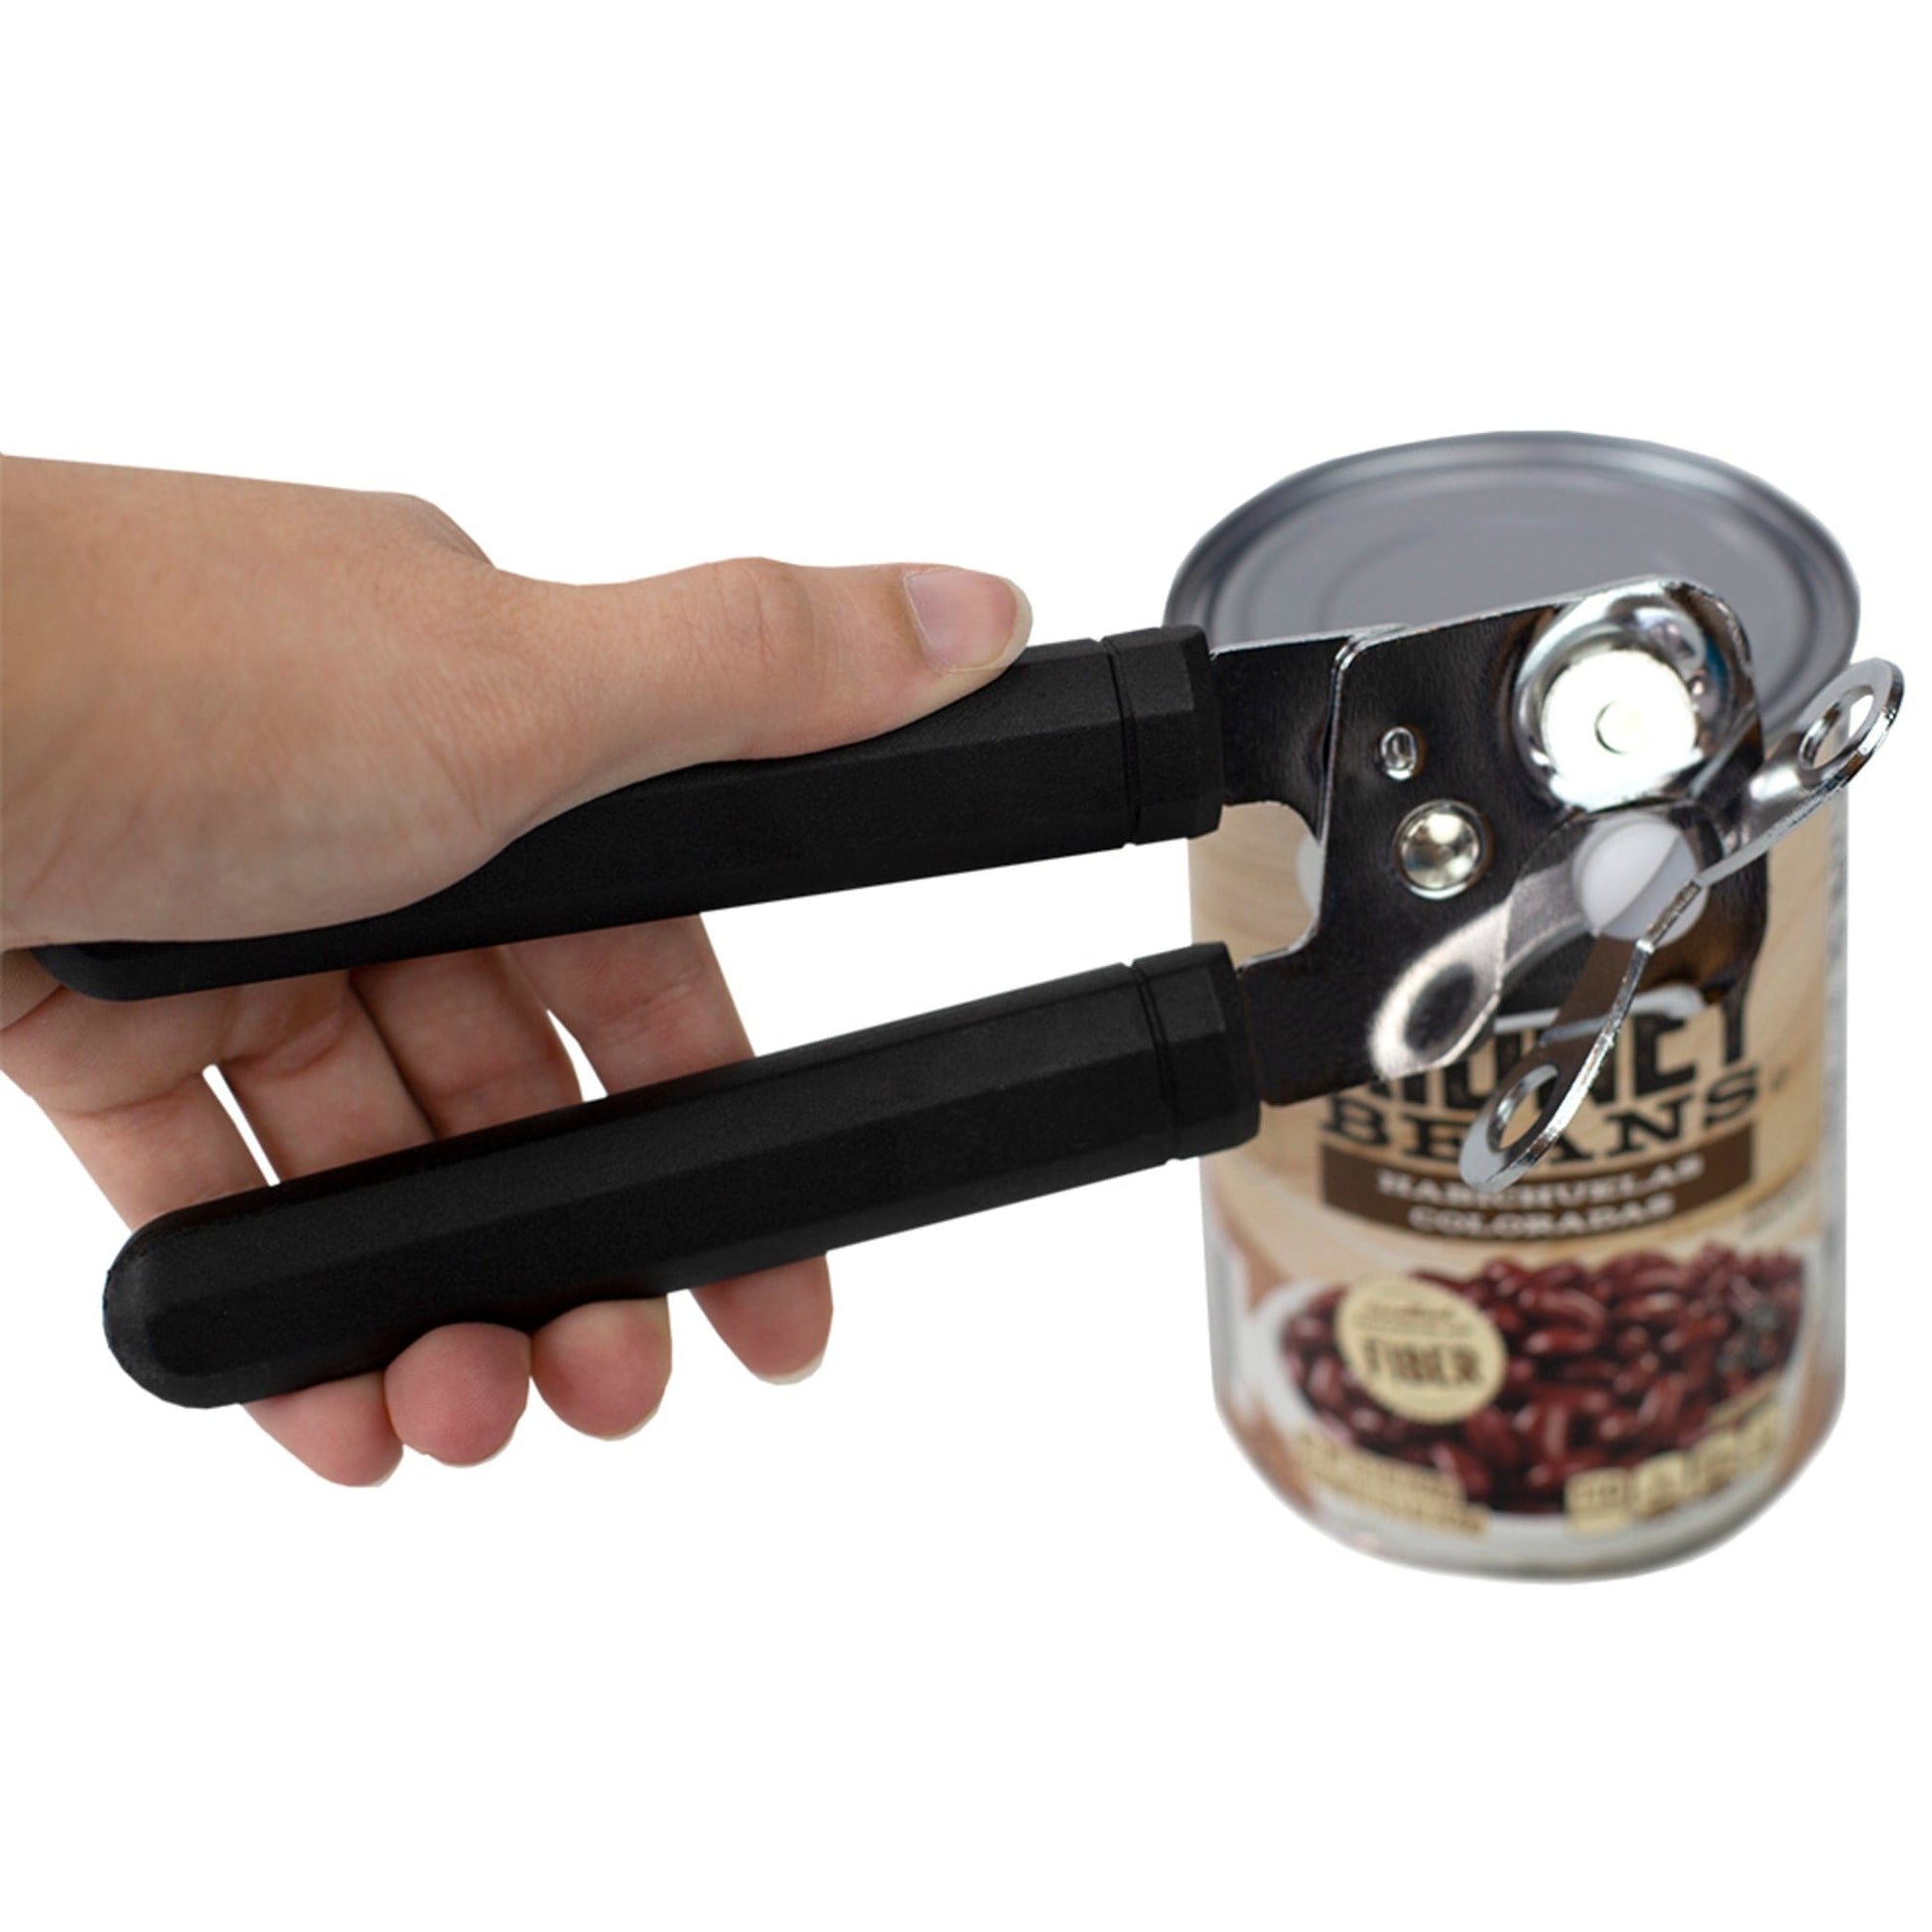 Stainless Steel Manual Handheld Can Opener with Long Smooth Grip